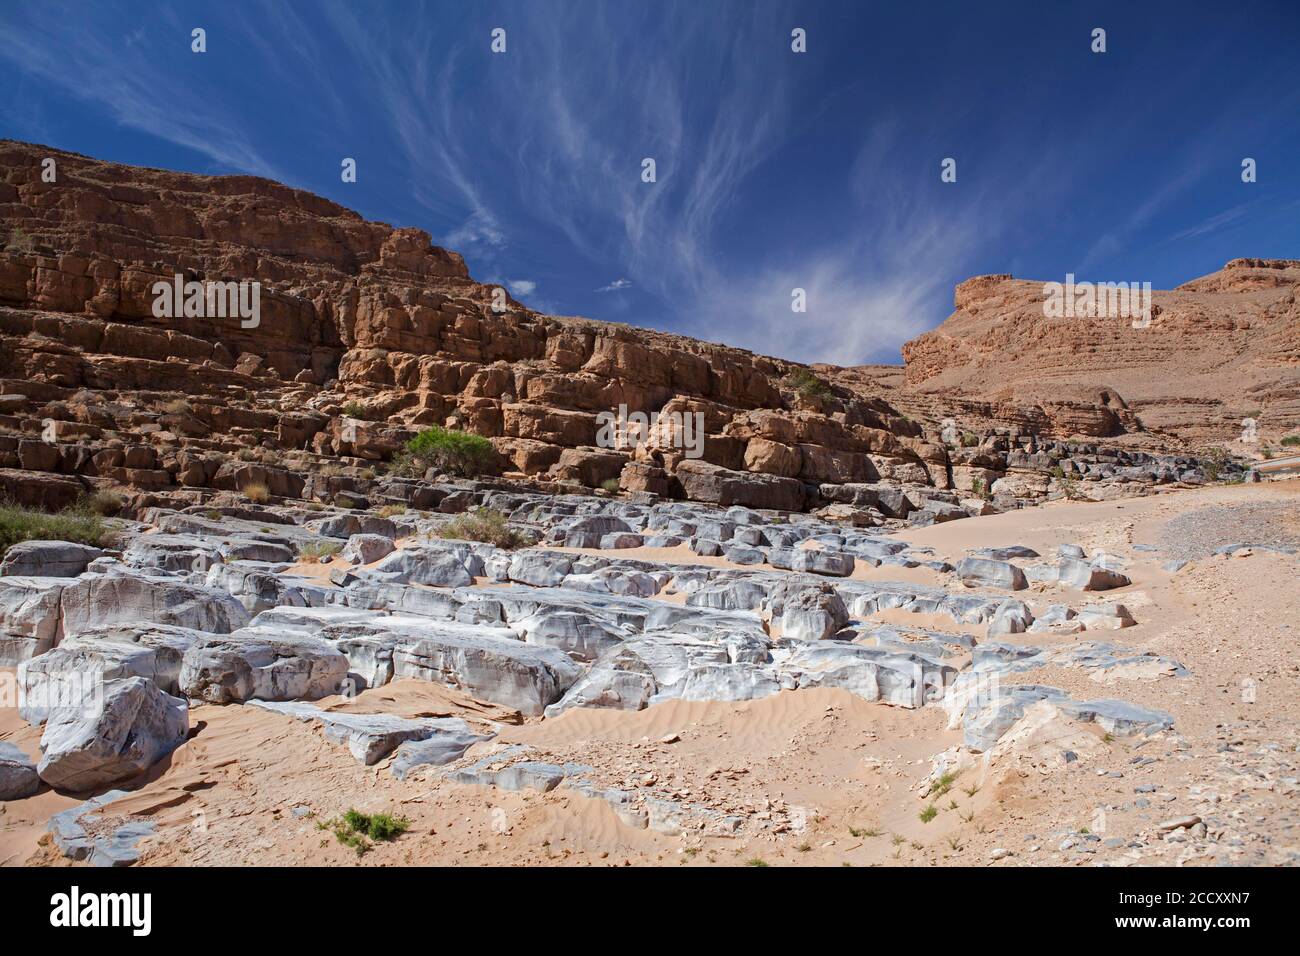 Rock formations in the Middle Atlas, Morocco Stock Photo